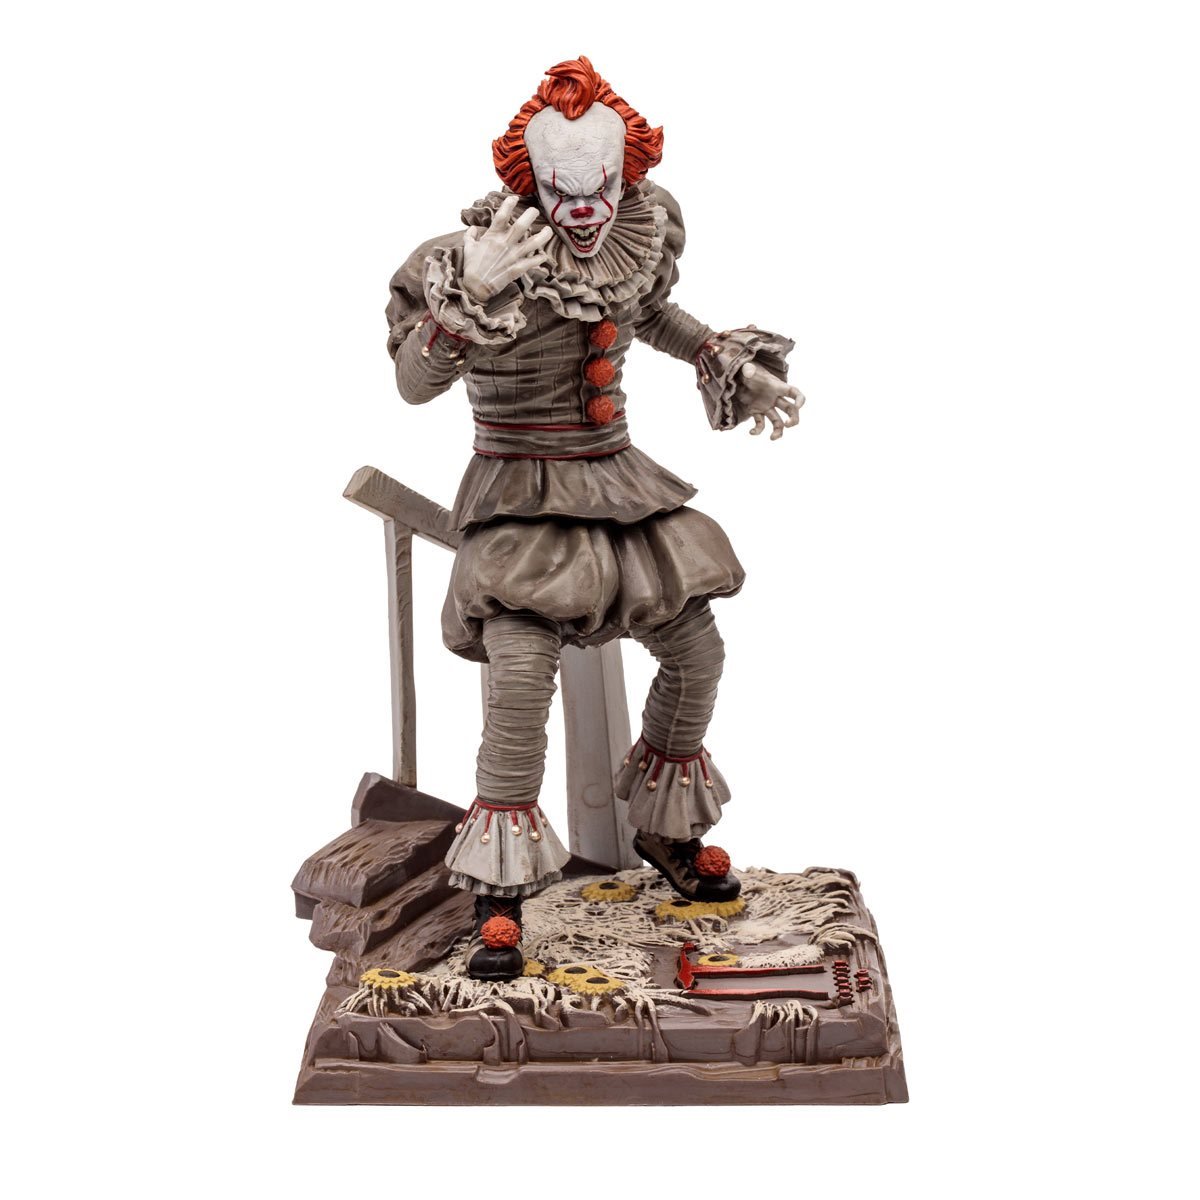 MCFARLANE Movie Maniacs WB 100: It Chapter Two Pennywise Wave 5 Limited Edition 6-Inch Scale Posed Figure